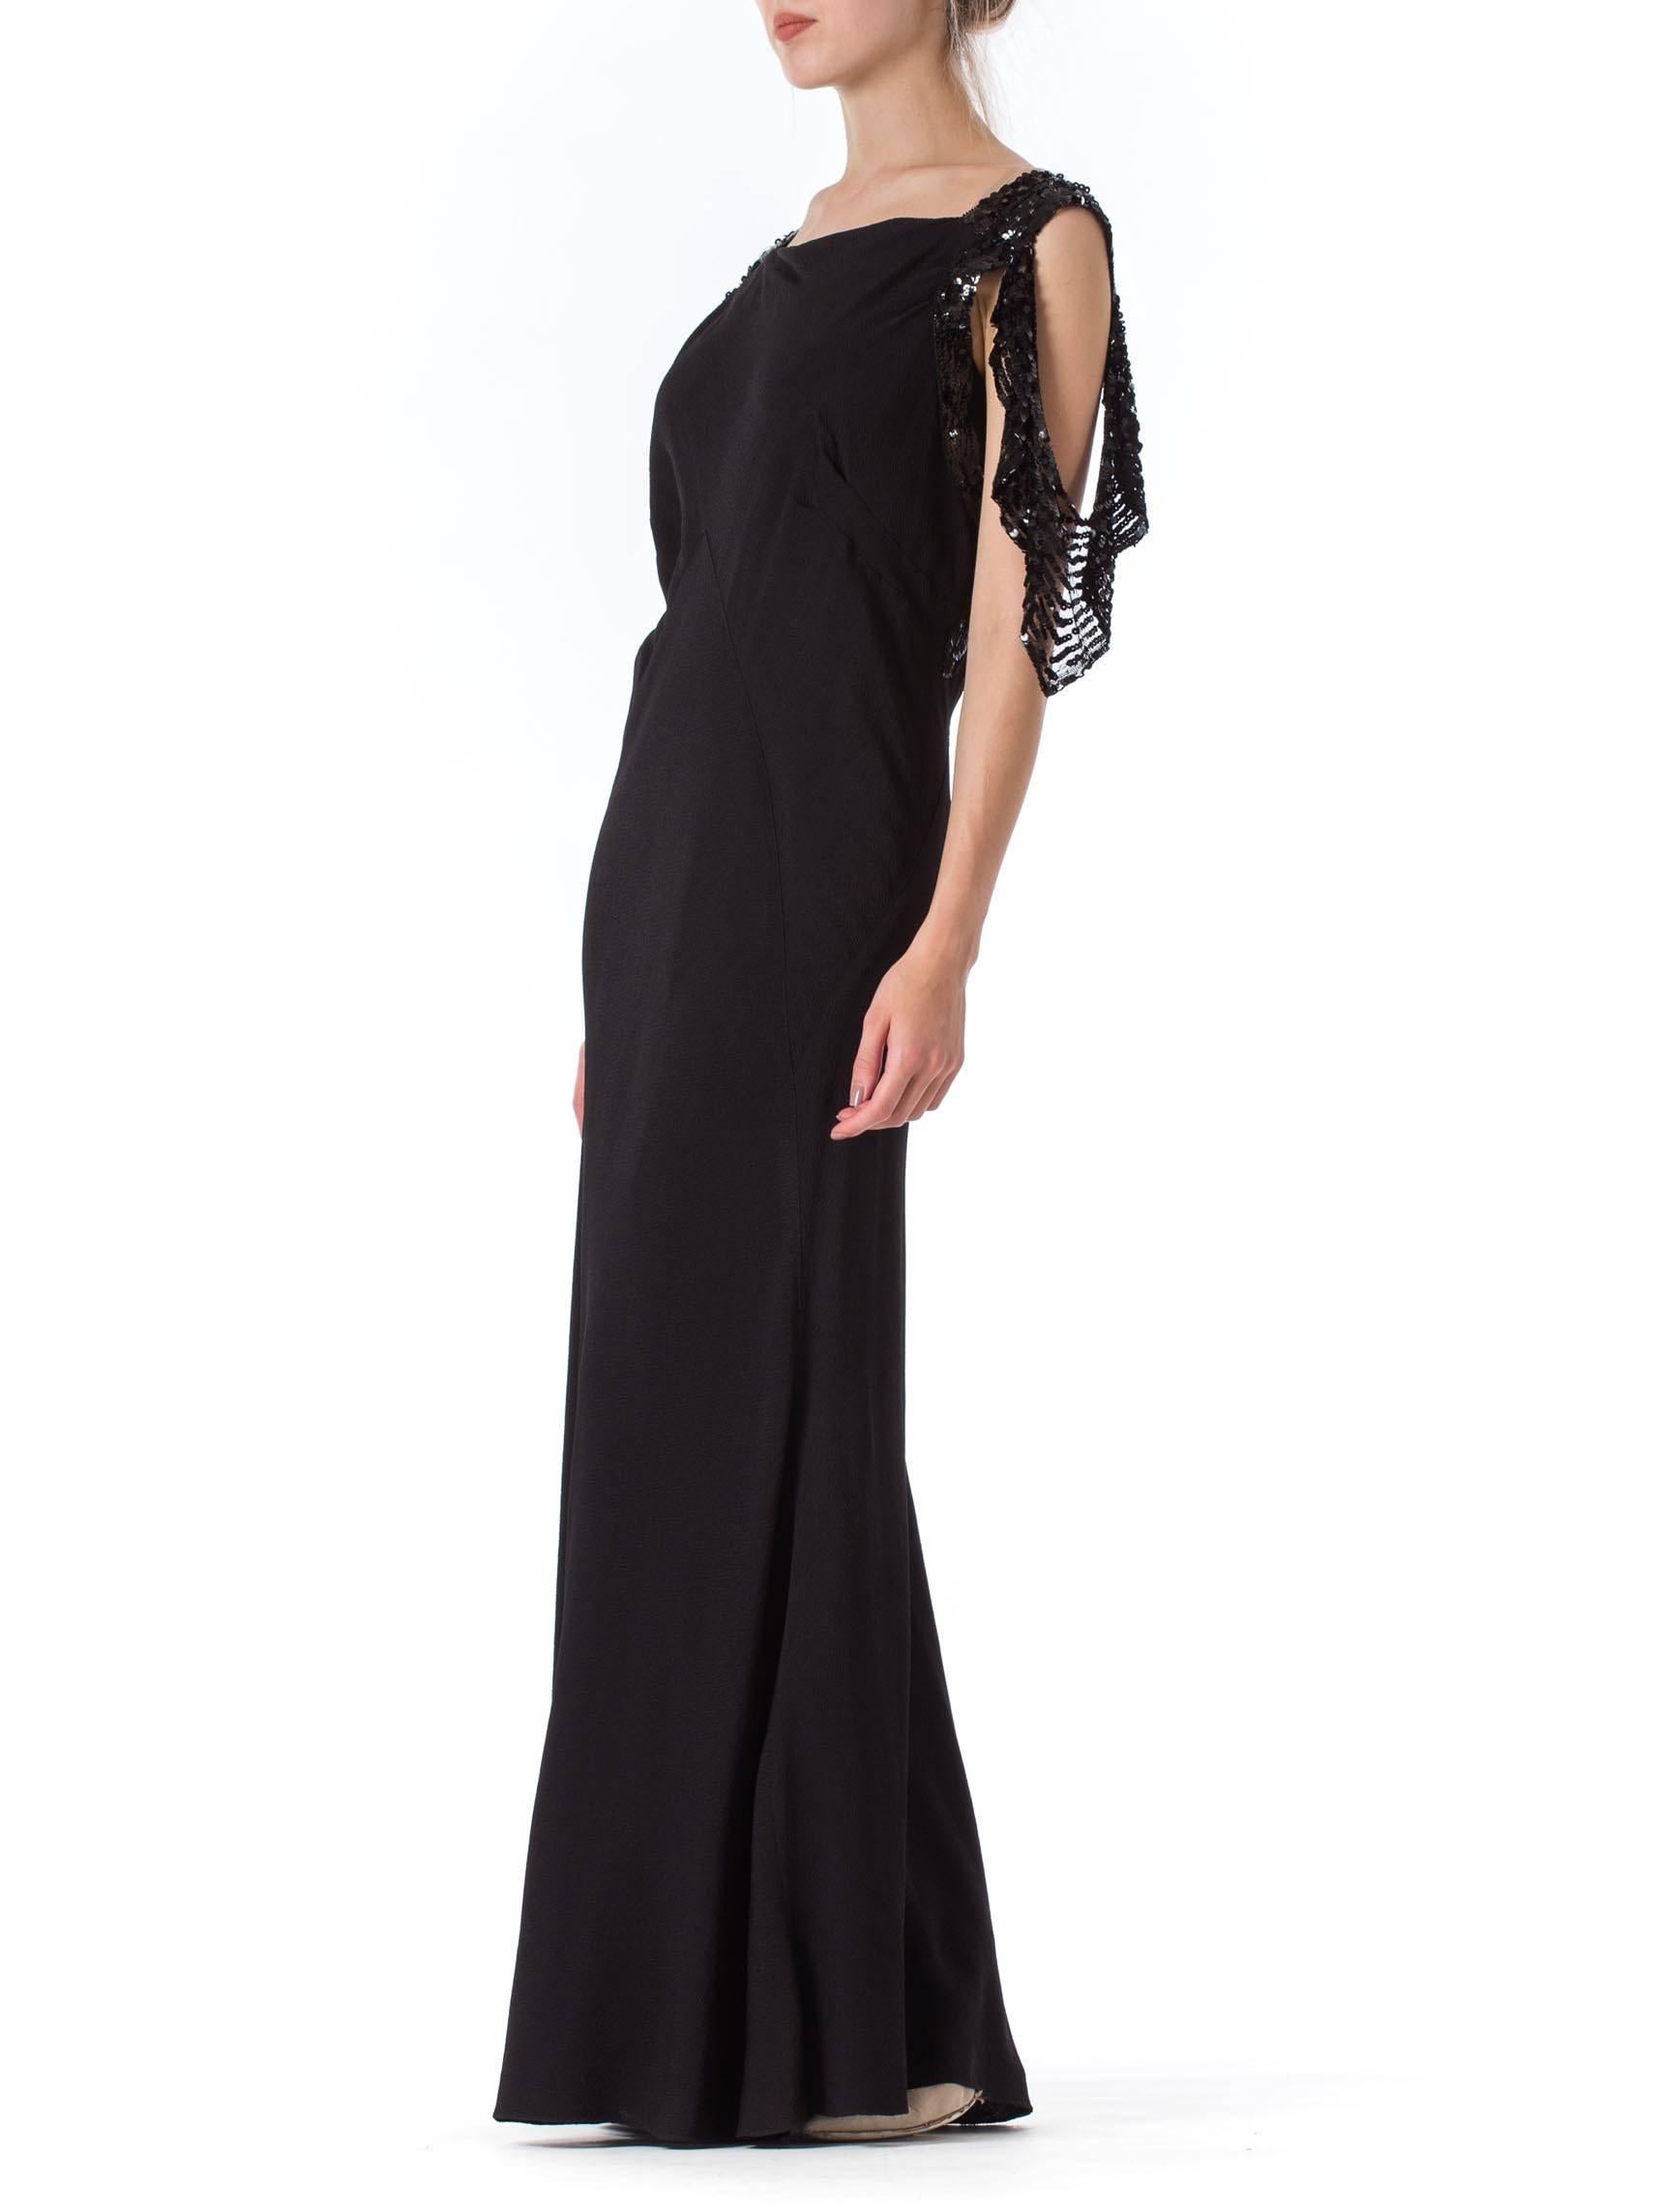 1930S Black Bias Cut Rayon Crepe Gown With Celluloid Sequin Peek-A-Boo ...